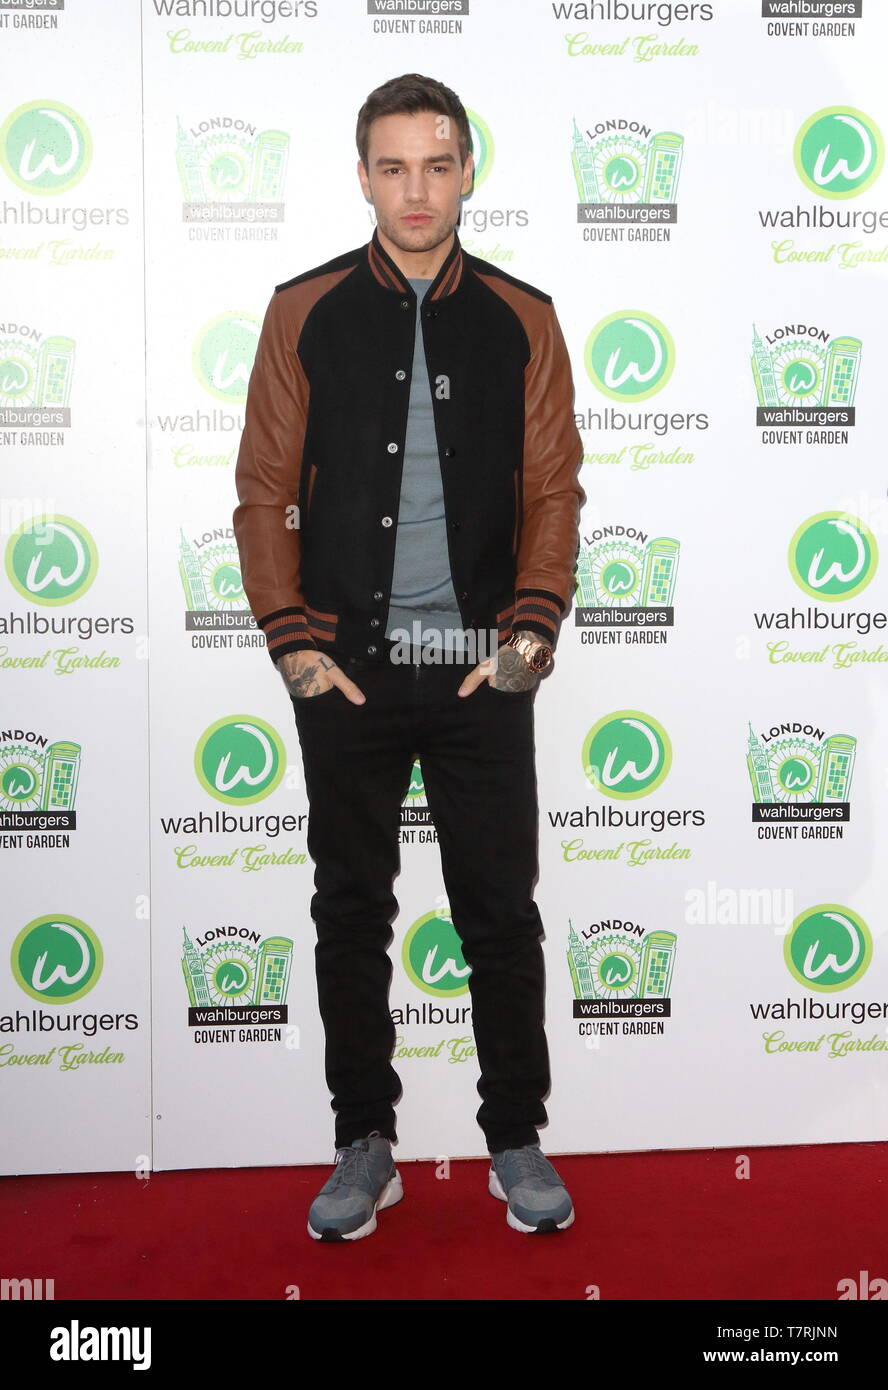 London, UK. Liam Payne  at a  VIP party   to celebrate Hollywood actor Mark Wahlberg's Wahlburgers restaurant opening celebrate in London's Covent Garden.    Wahlburgers is a restaurant chain owned by Mark Wahlberg with his brothers Donnie and Mark.  4th May 2019. Ref:LMK73-S2373-050519 Keith Mayhew/Landmark Media  WWW.LMKMEDIA.COM. Stock Photo